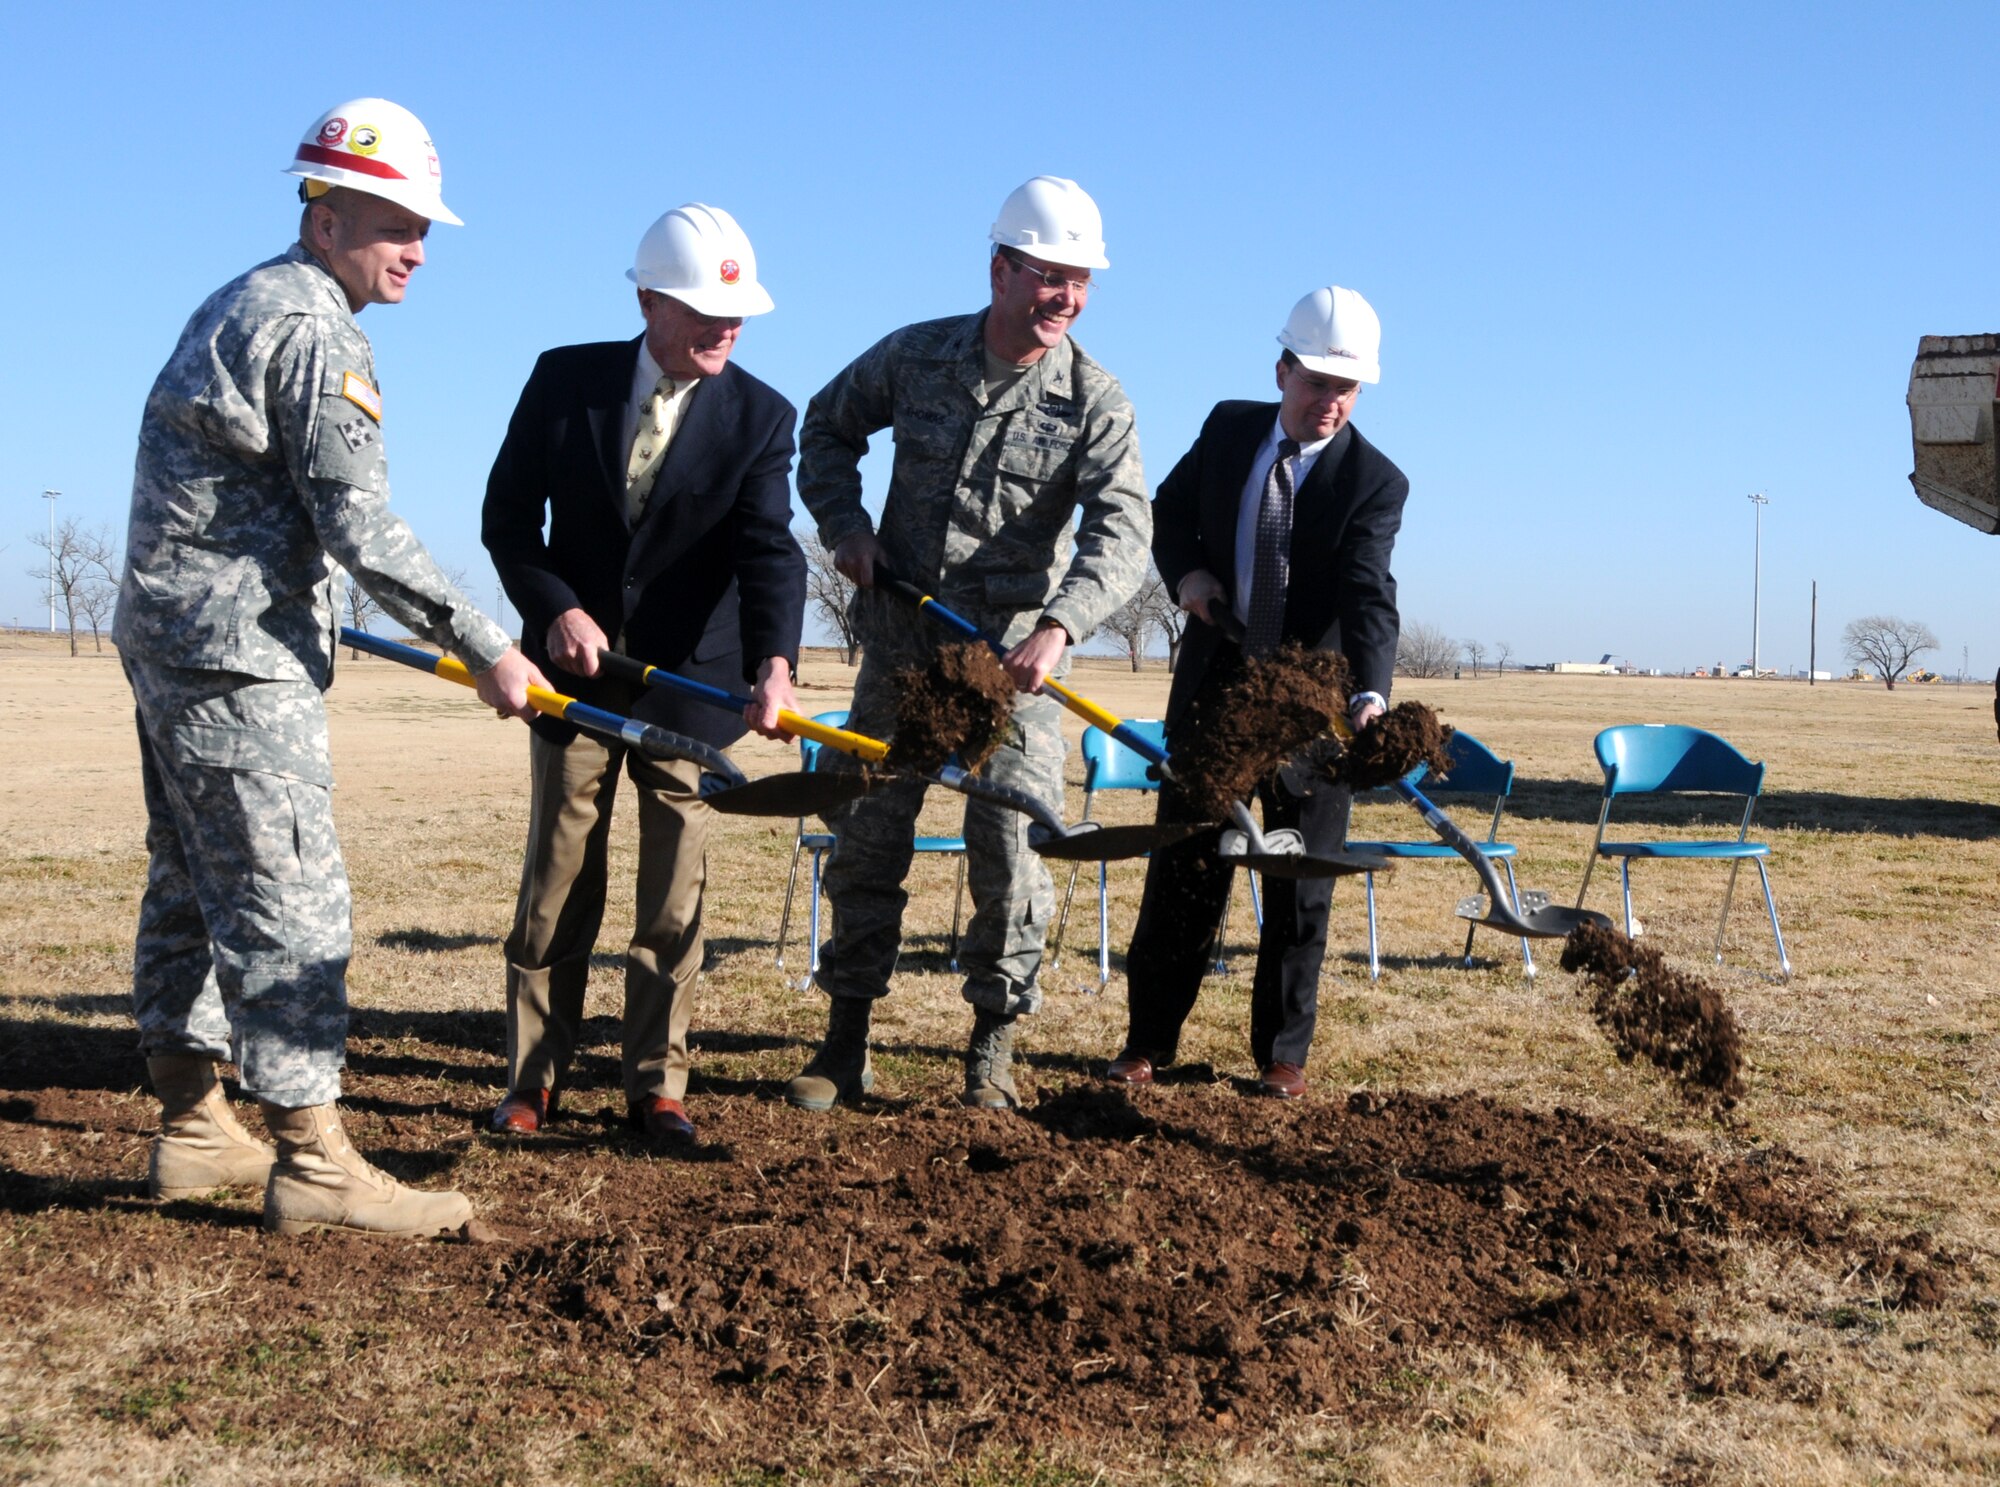 ALTUS AIR FORCE BASE, Okla—(From left) Army Col. Tony Funkhouser, commander of the Tulsa District Corps of Engineers, Col. Ty Thomas, commander of the 97th Air Mobility Wing, Jim Inhofe, U.S. senator, and David Scott, SGS representative, shovel the first bit of dirt where the new  radar approach control facility will be built Jan.22. This facility will house the state- of -the art digital aircraft surveillance radar that will offer better capability to air traffic controllers base and throughout southwest Oklahoma. The construction will cost $7.1 million and will be completed in April 2011. The new radar will replace the 1970s-era systems currently in use. (U.S. Air Force photo/Senior Airman Cherice Bryant)
